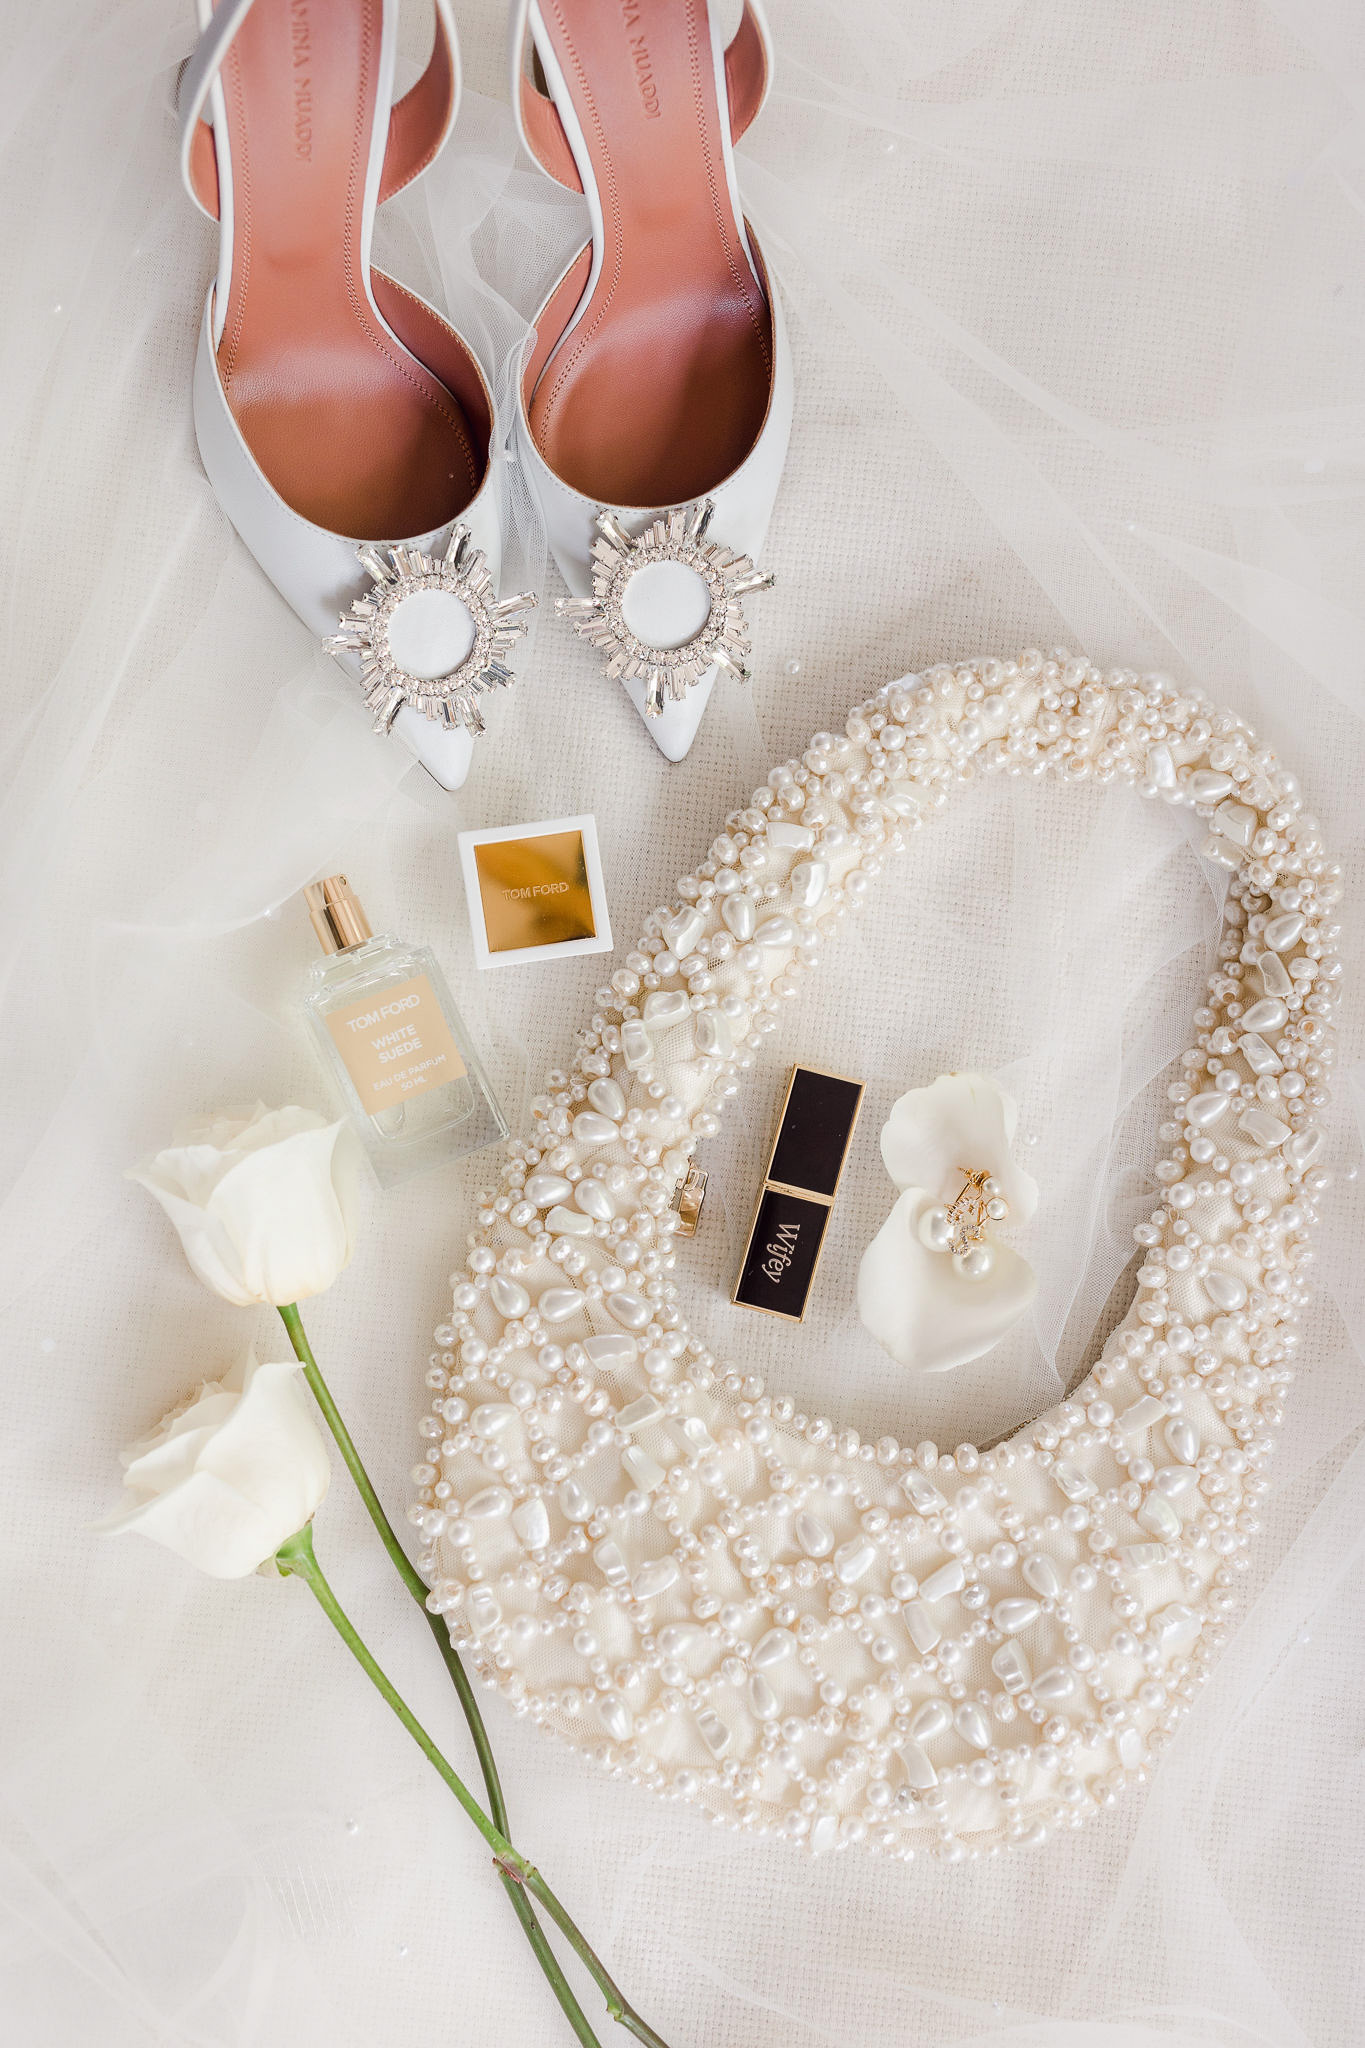 A white purse, shoes and flowers are laid out on a white table.